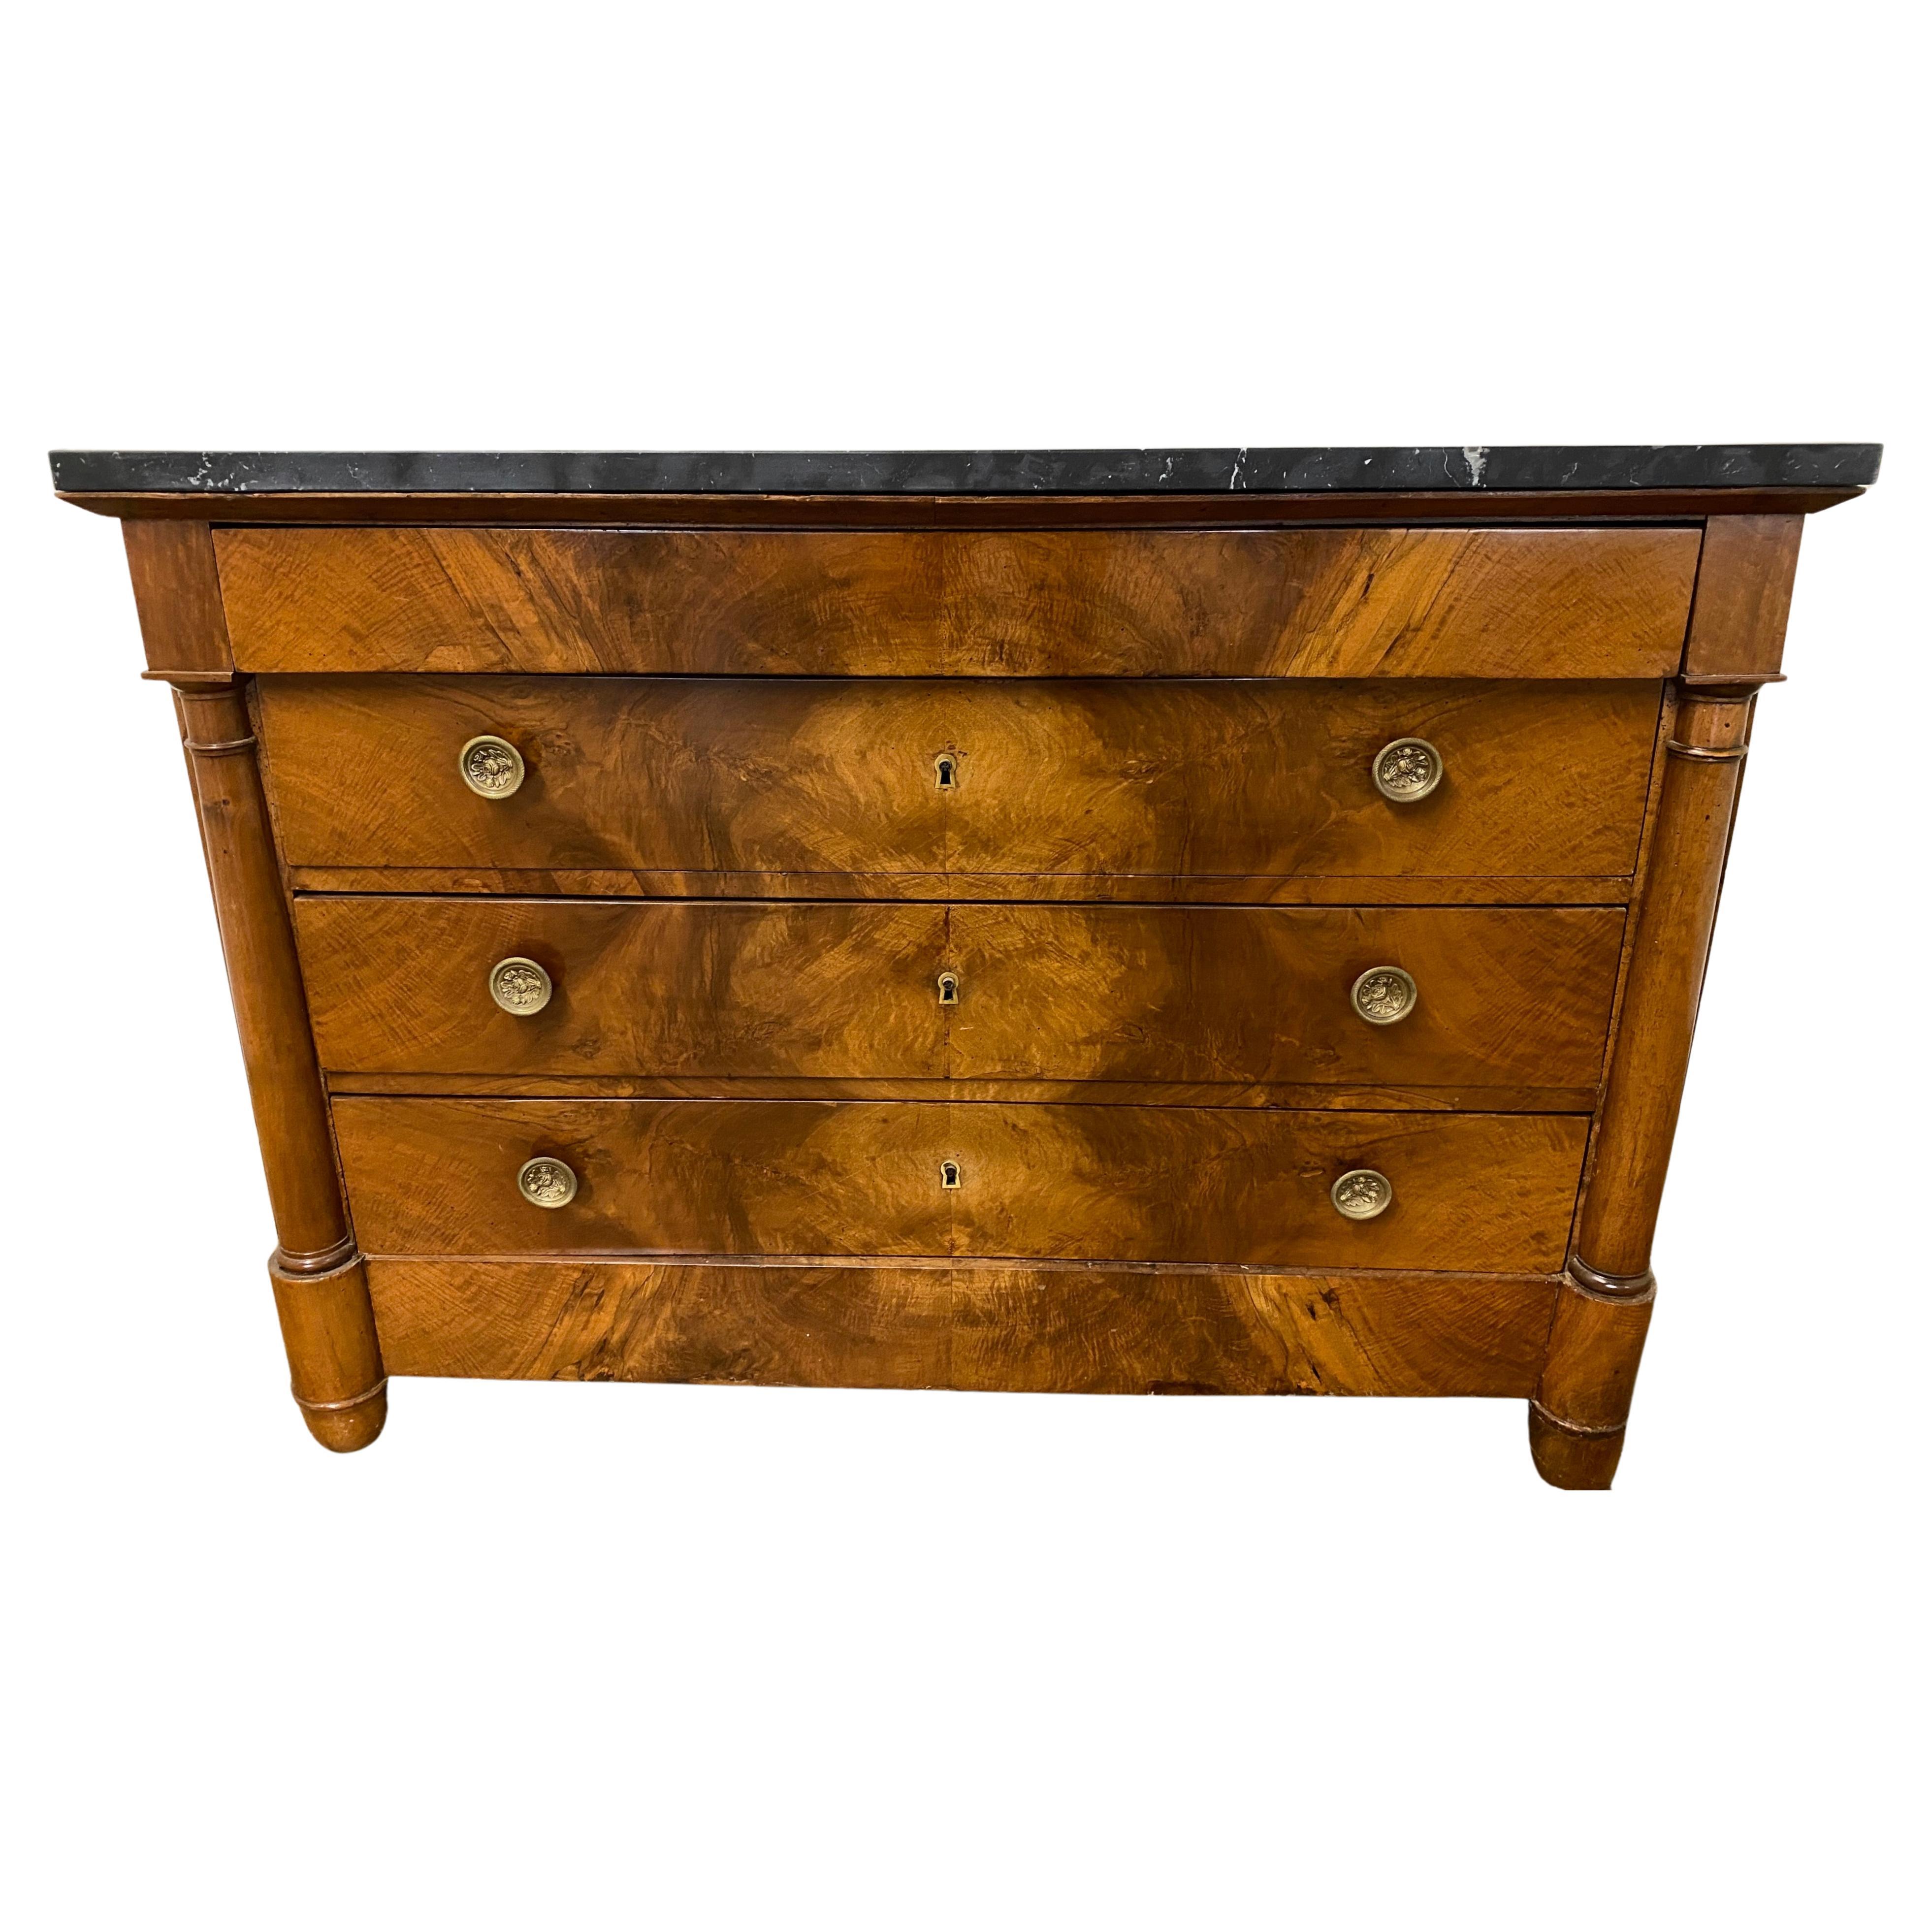 A fine example of early 19th Century French chest of drawers with black marble top, rounded columnar sides terminating on rounded block feet. This Empire period commode from the reign of Napoleon I, with exterior of book matched mahogany veneer